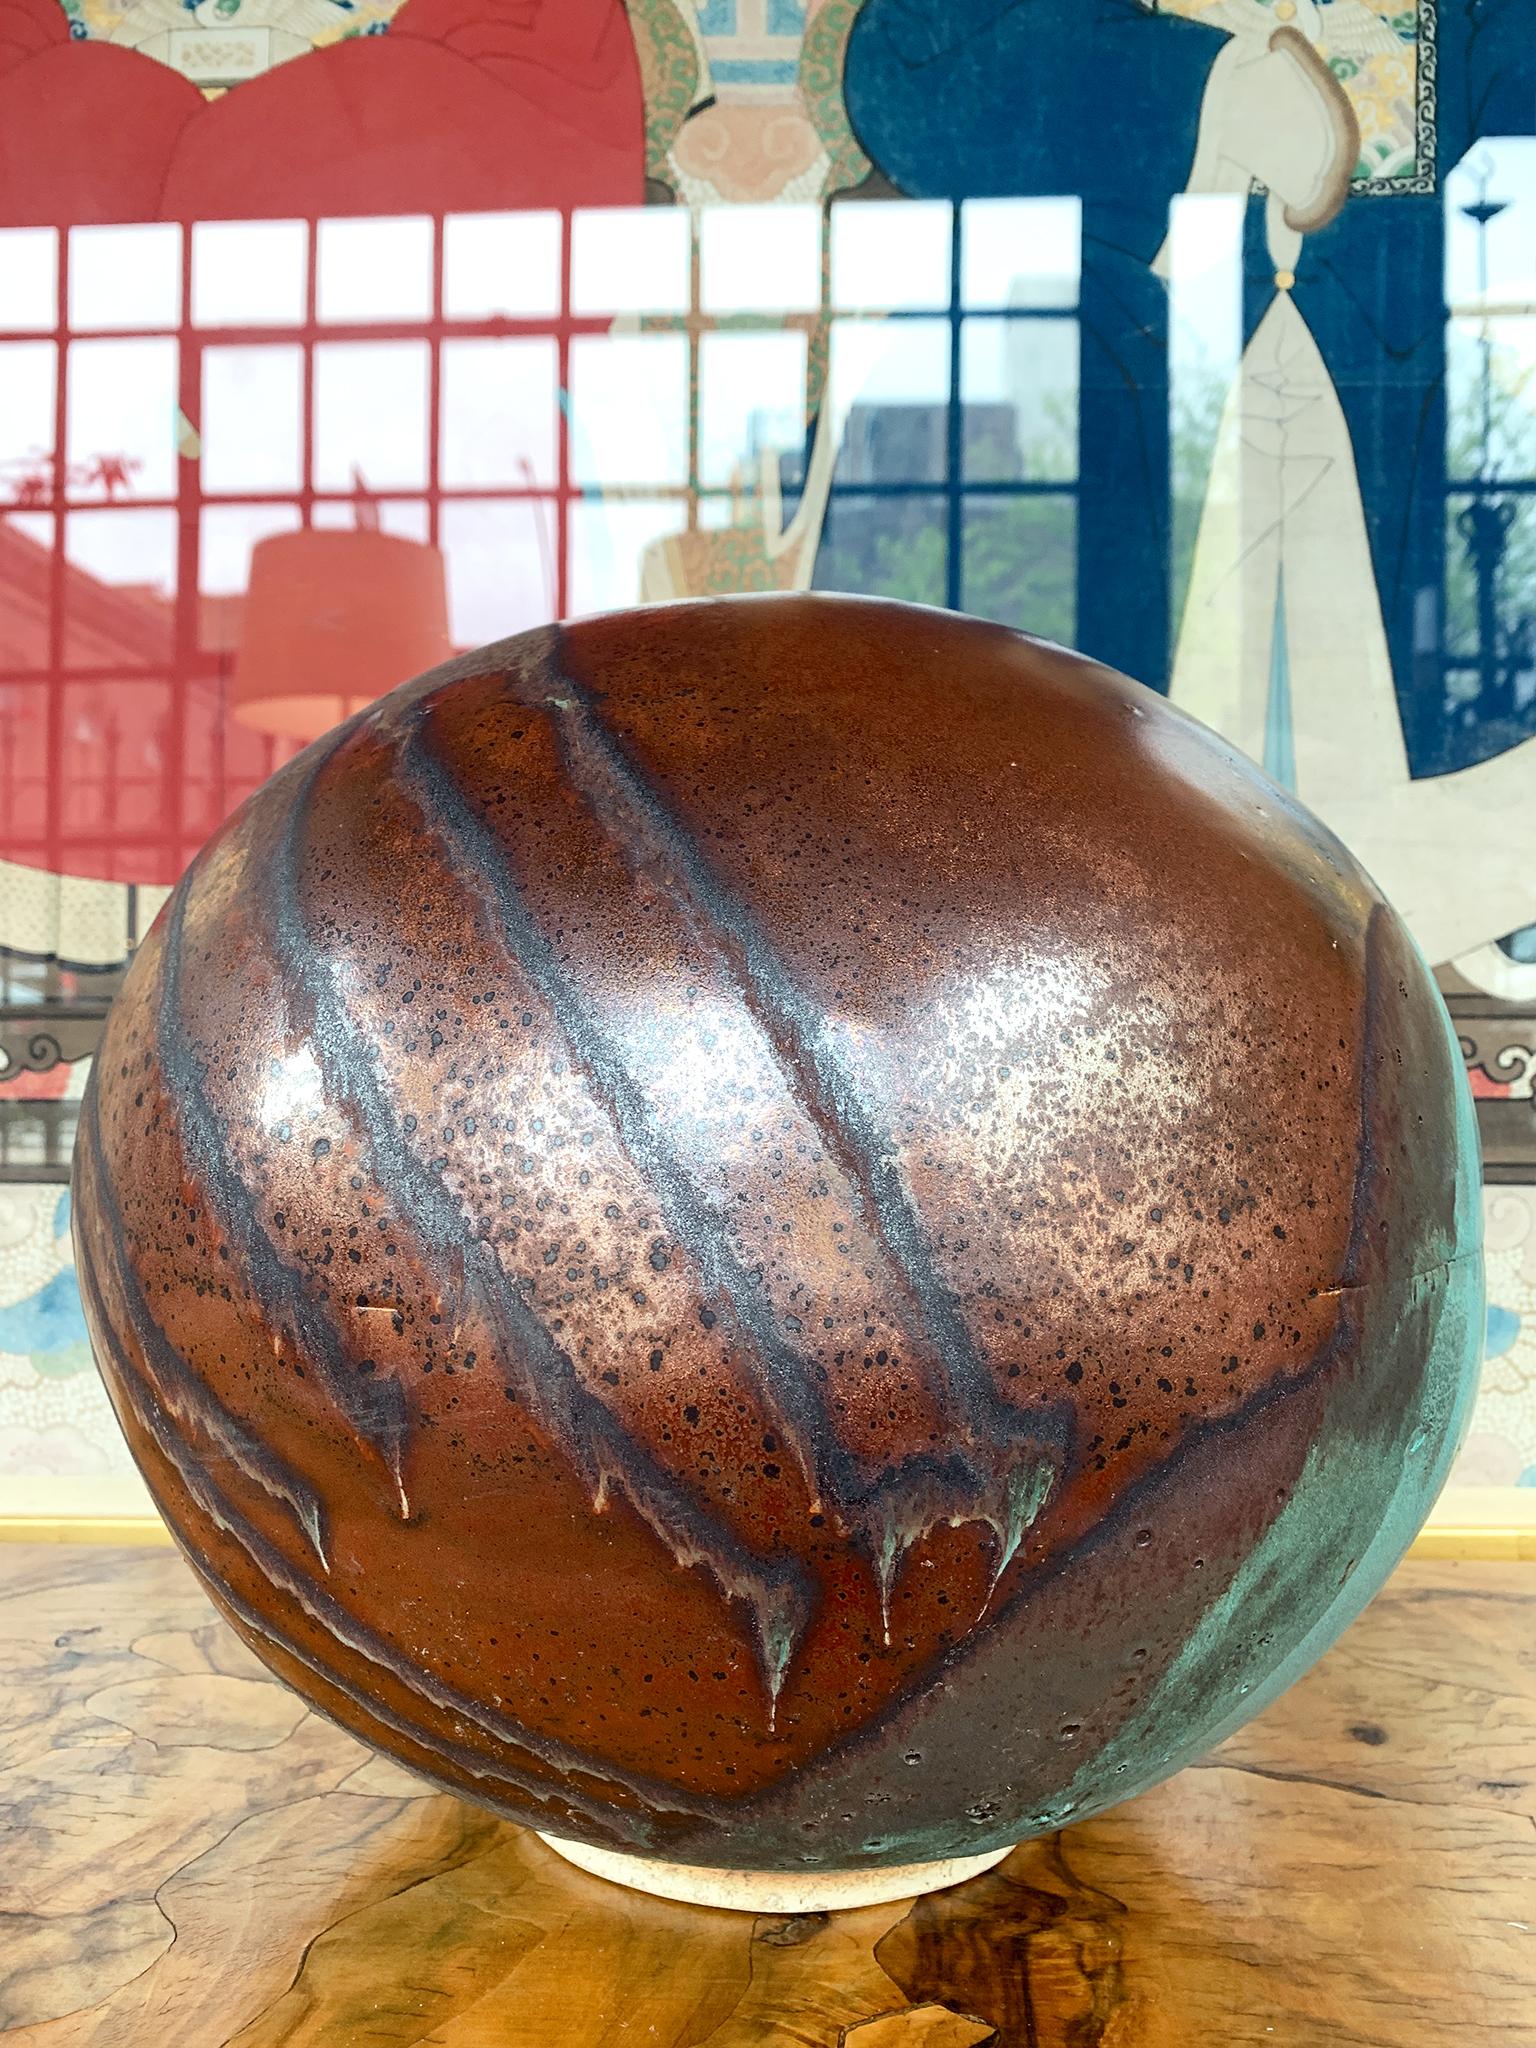 Stoneware Thom Lussier Ceramic Vessel #3 - From the Oxidized Copper Collection For Sale